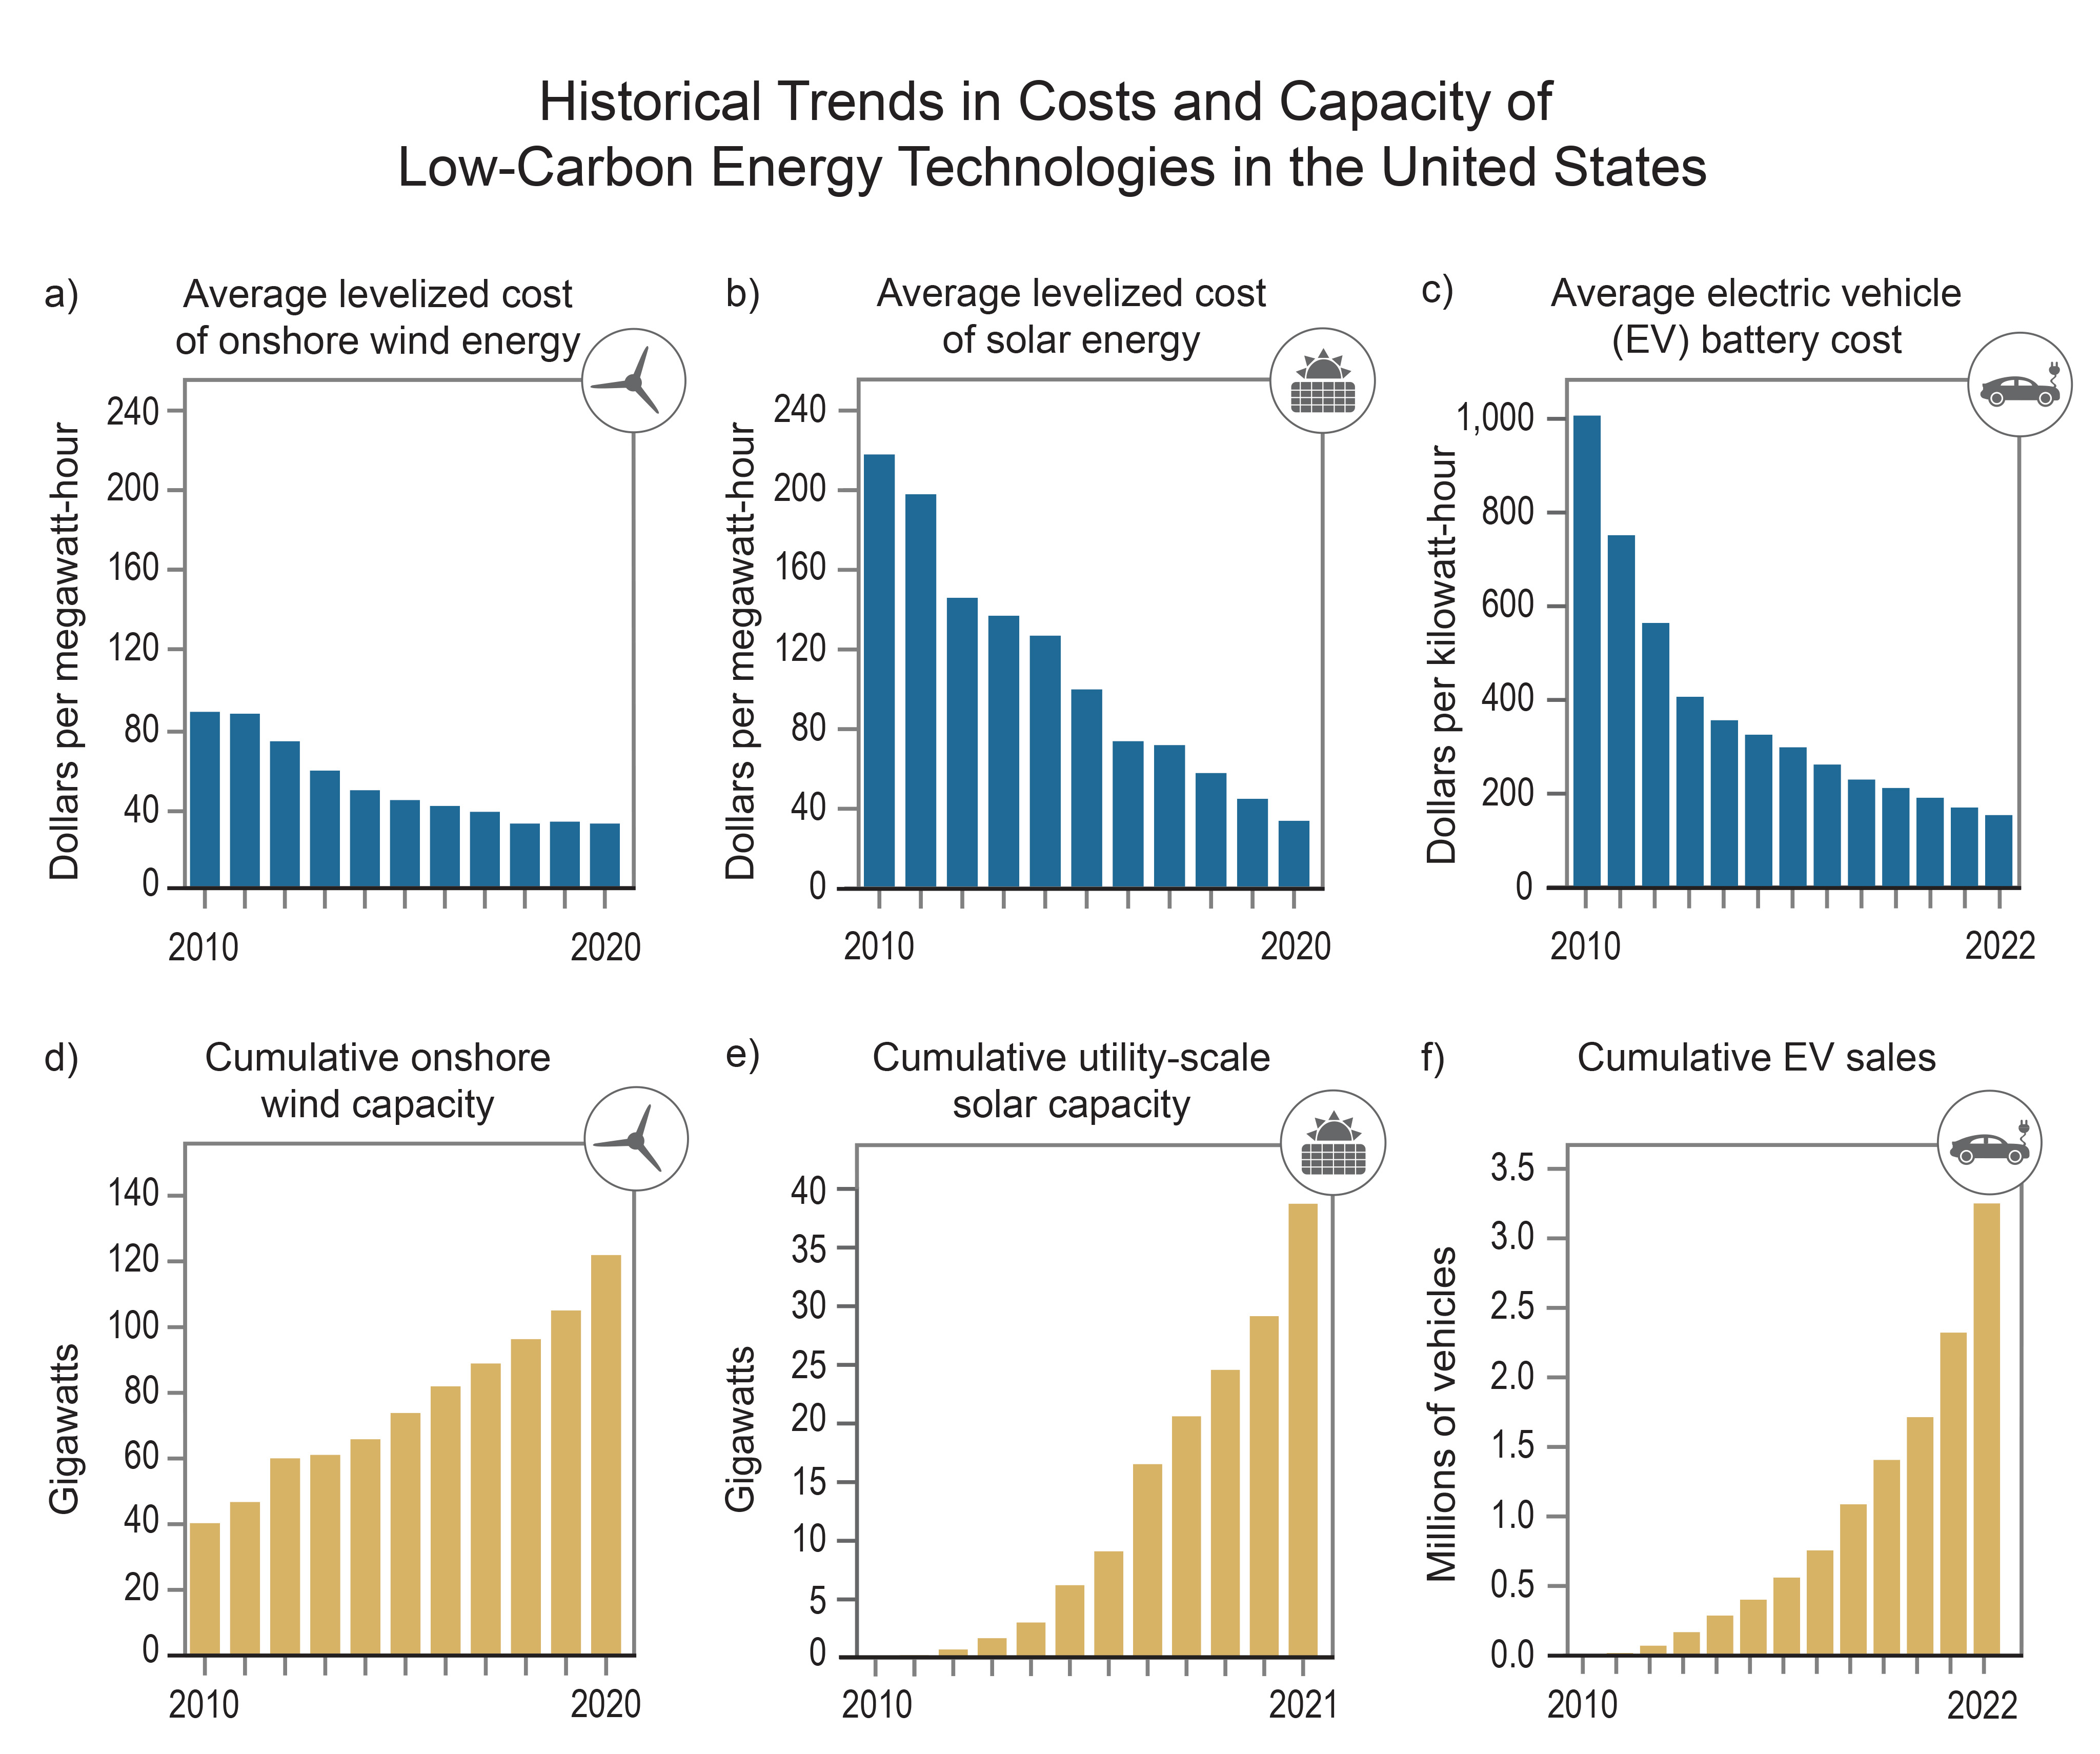 Historical Trends in Costs and Capacity of Low-Carbon Energy Technologies in the United States